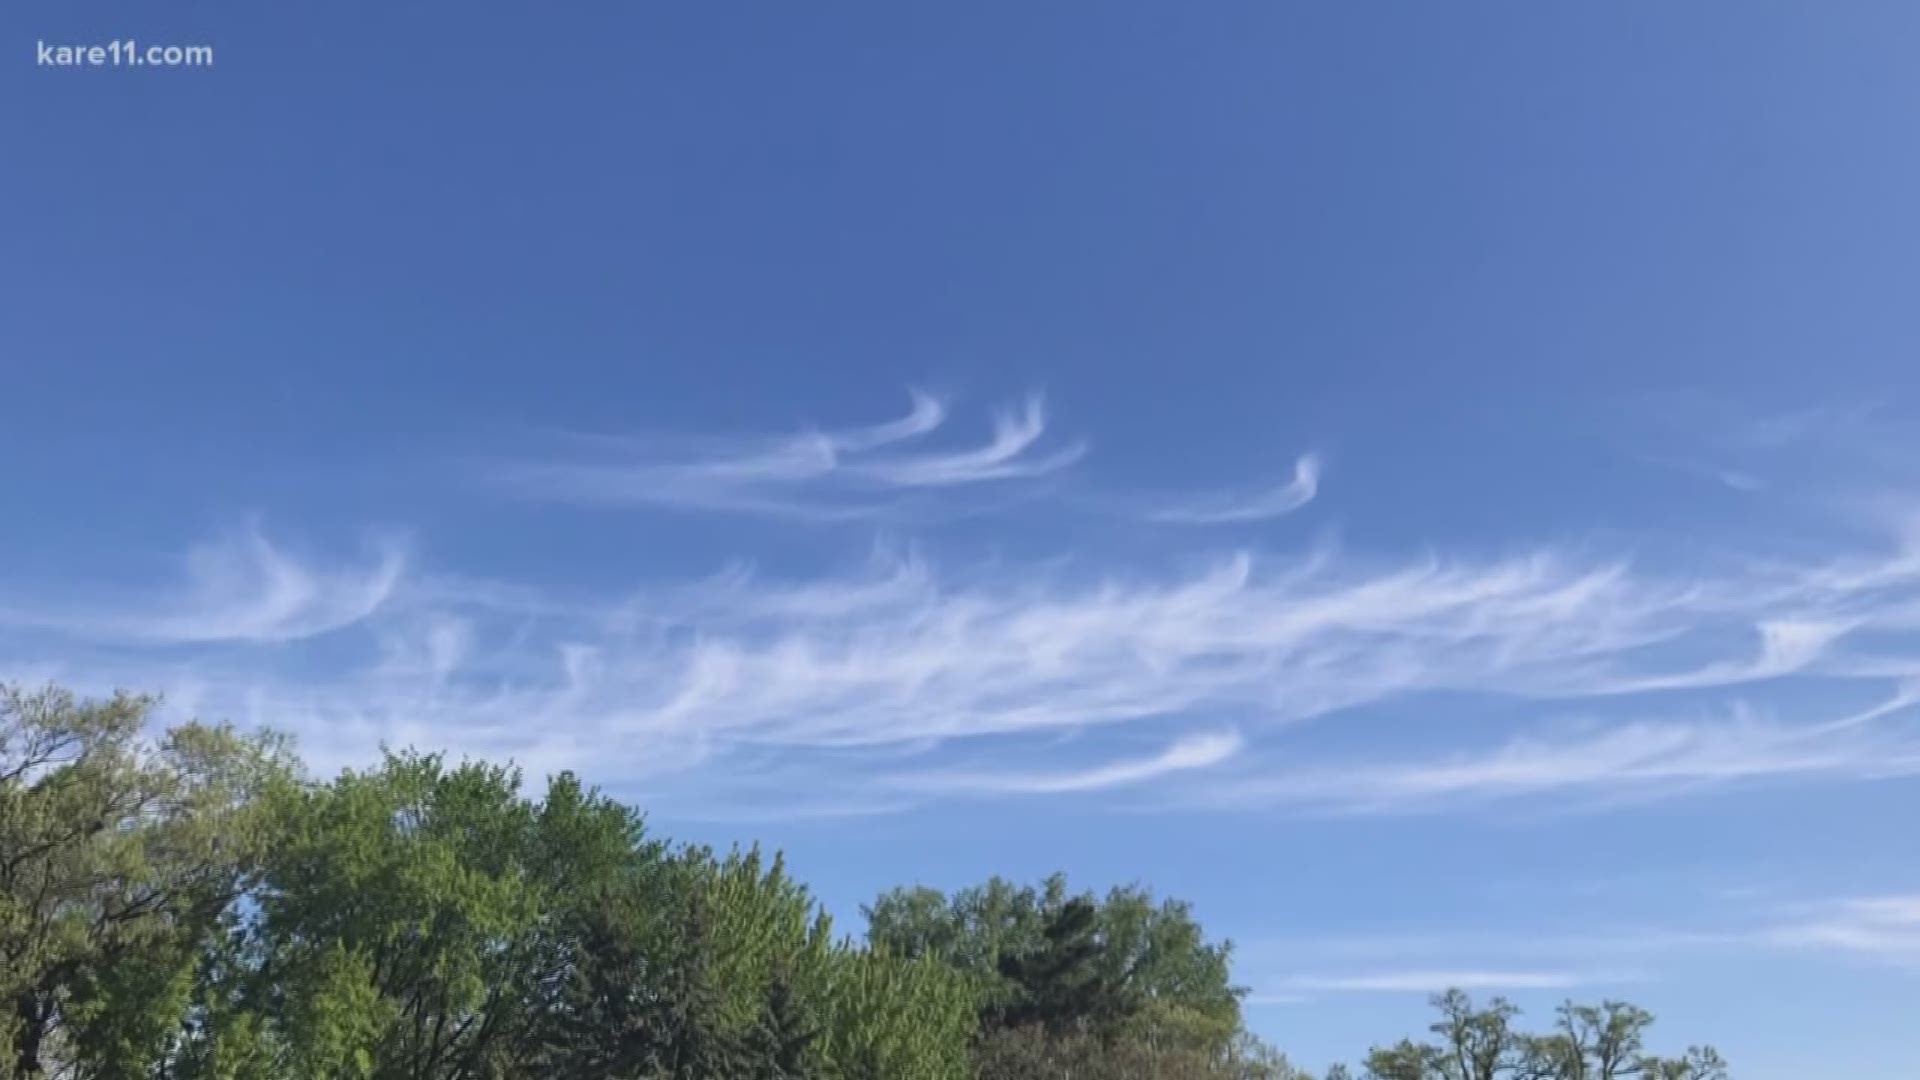 If you were out and about Monday morning, you may have seen some wispy clouds with a curly streak at the end. Like most cloud formations, they can tell us about what's going on in the atmosphere above us right now, and also what's on the way. https://kare11.tv/2Wja0ti